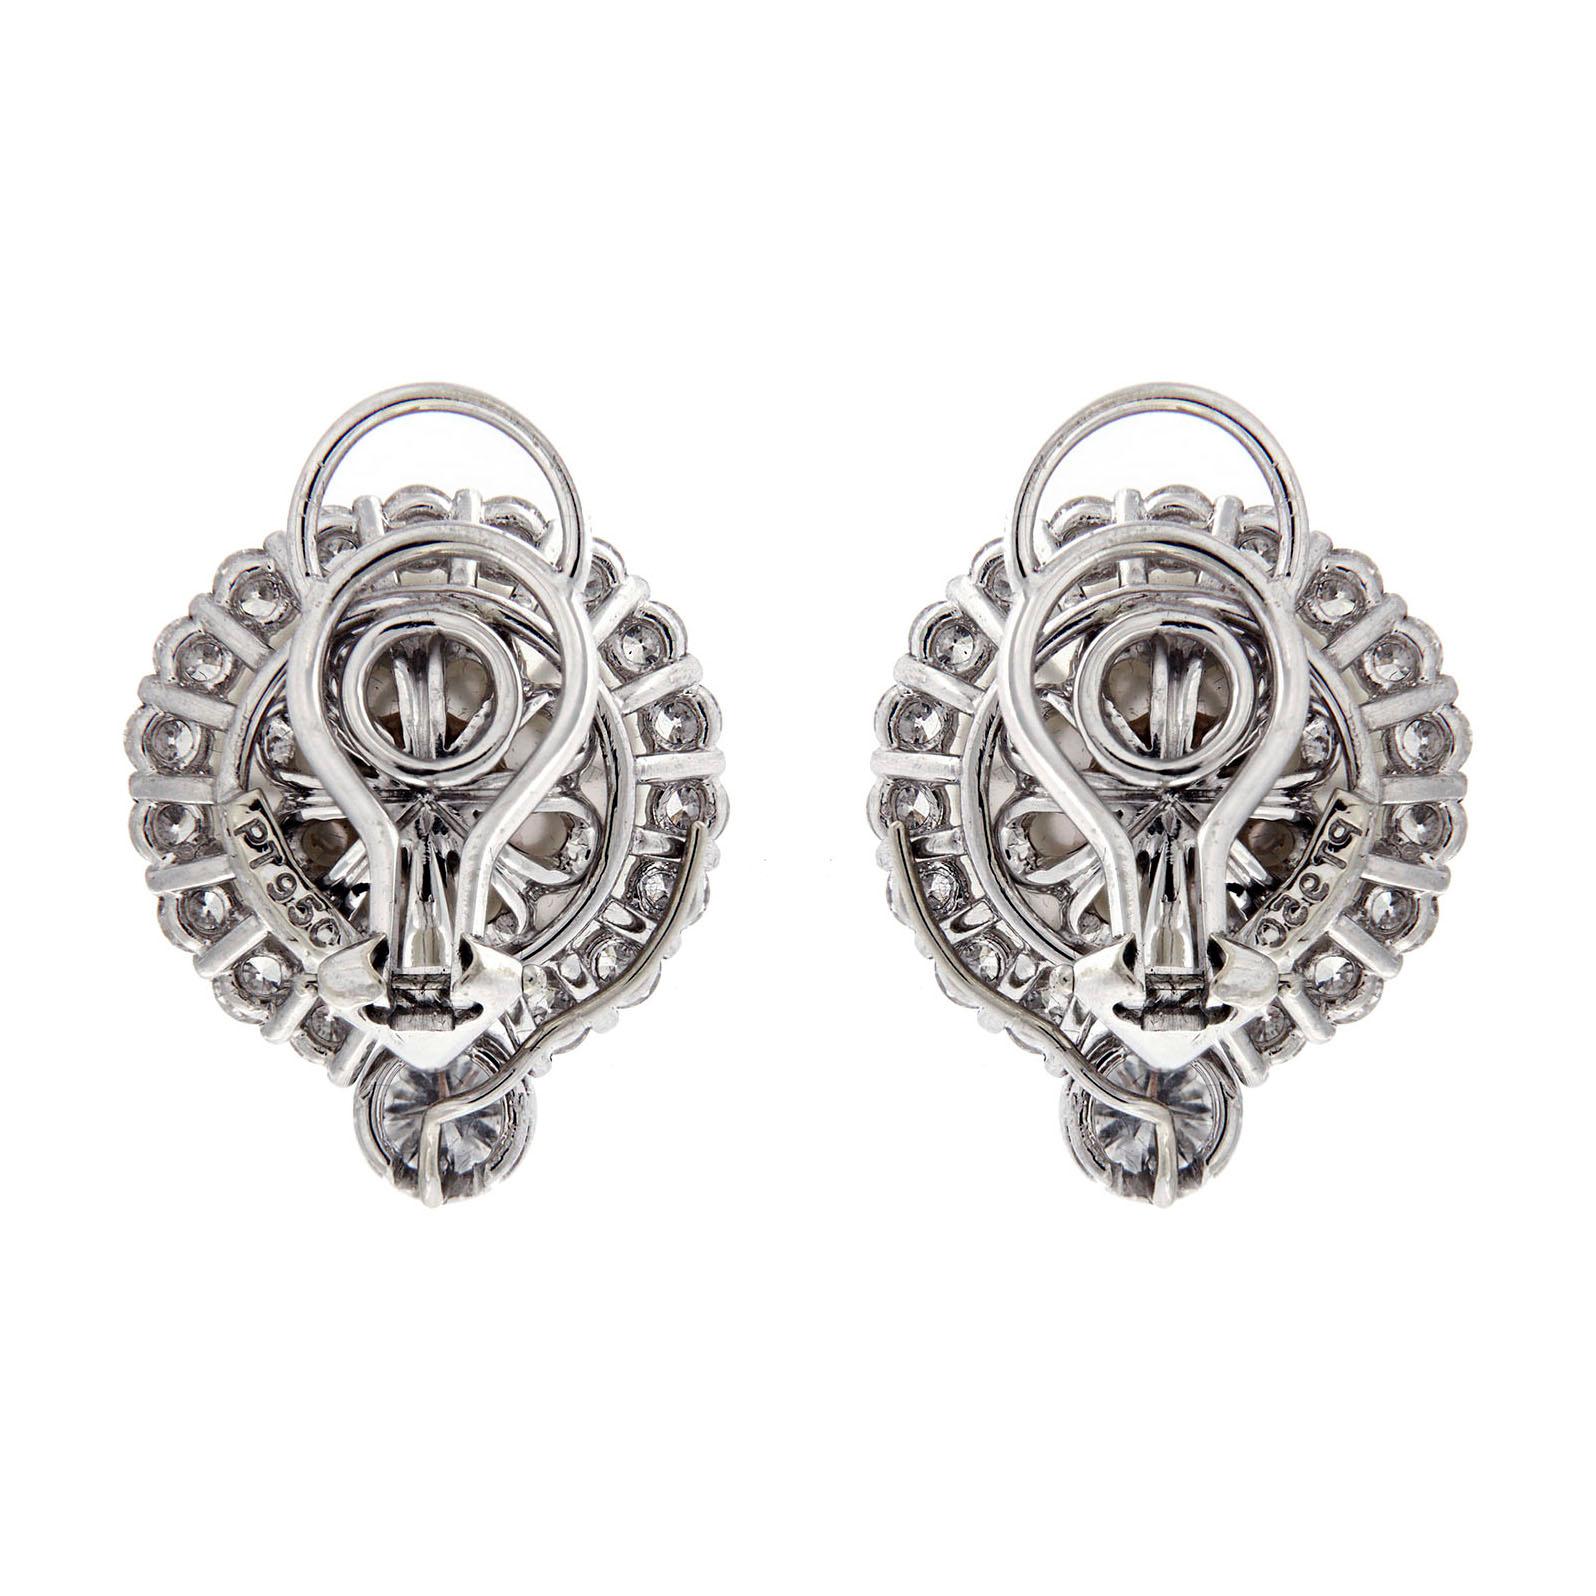 Diamonds add brilliance to these earrings, while white South Sea pearls serve as the focus. A thin border of round brilliant cut diamonds set in platinum outline each pearl. Larger, bezel set diamonds sit beneath the pearls. There are 36 round